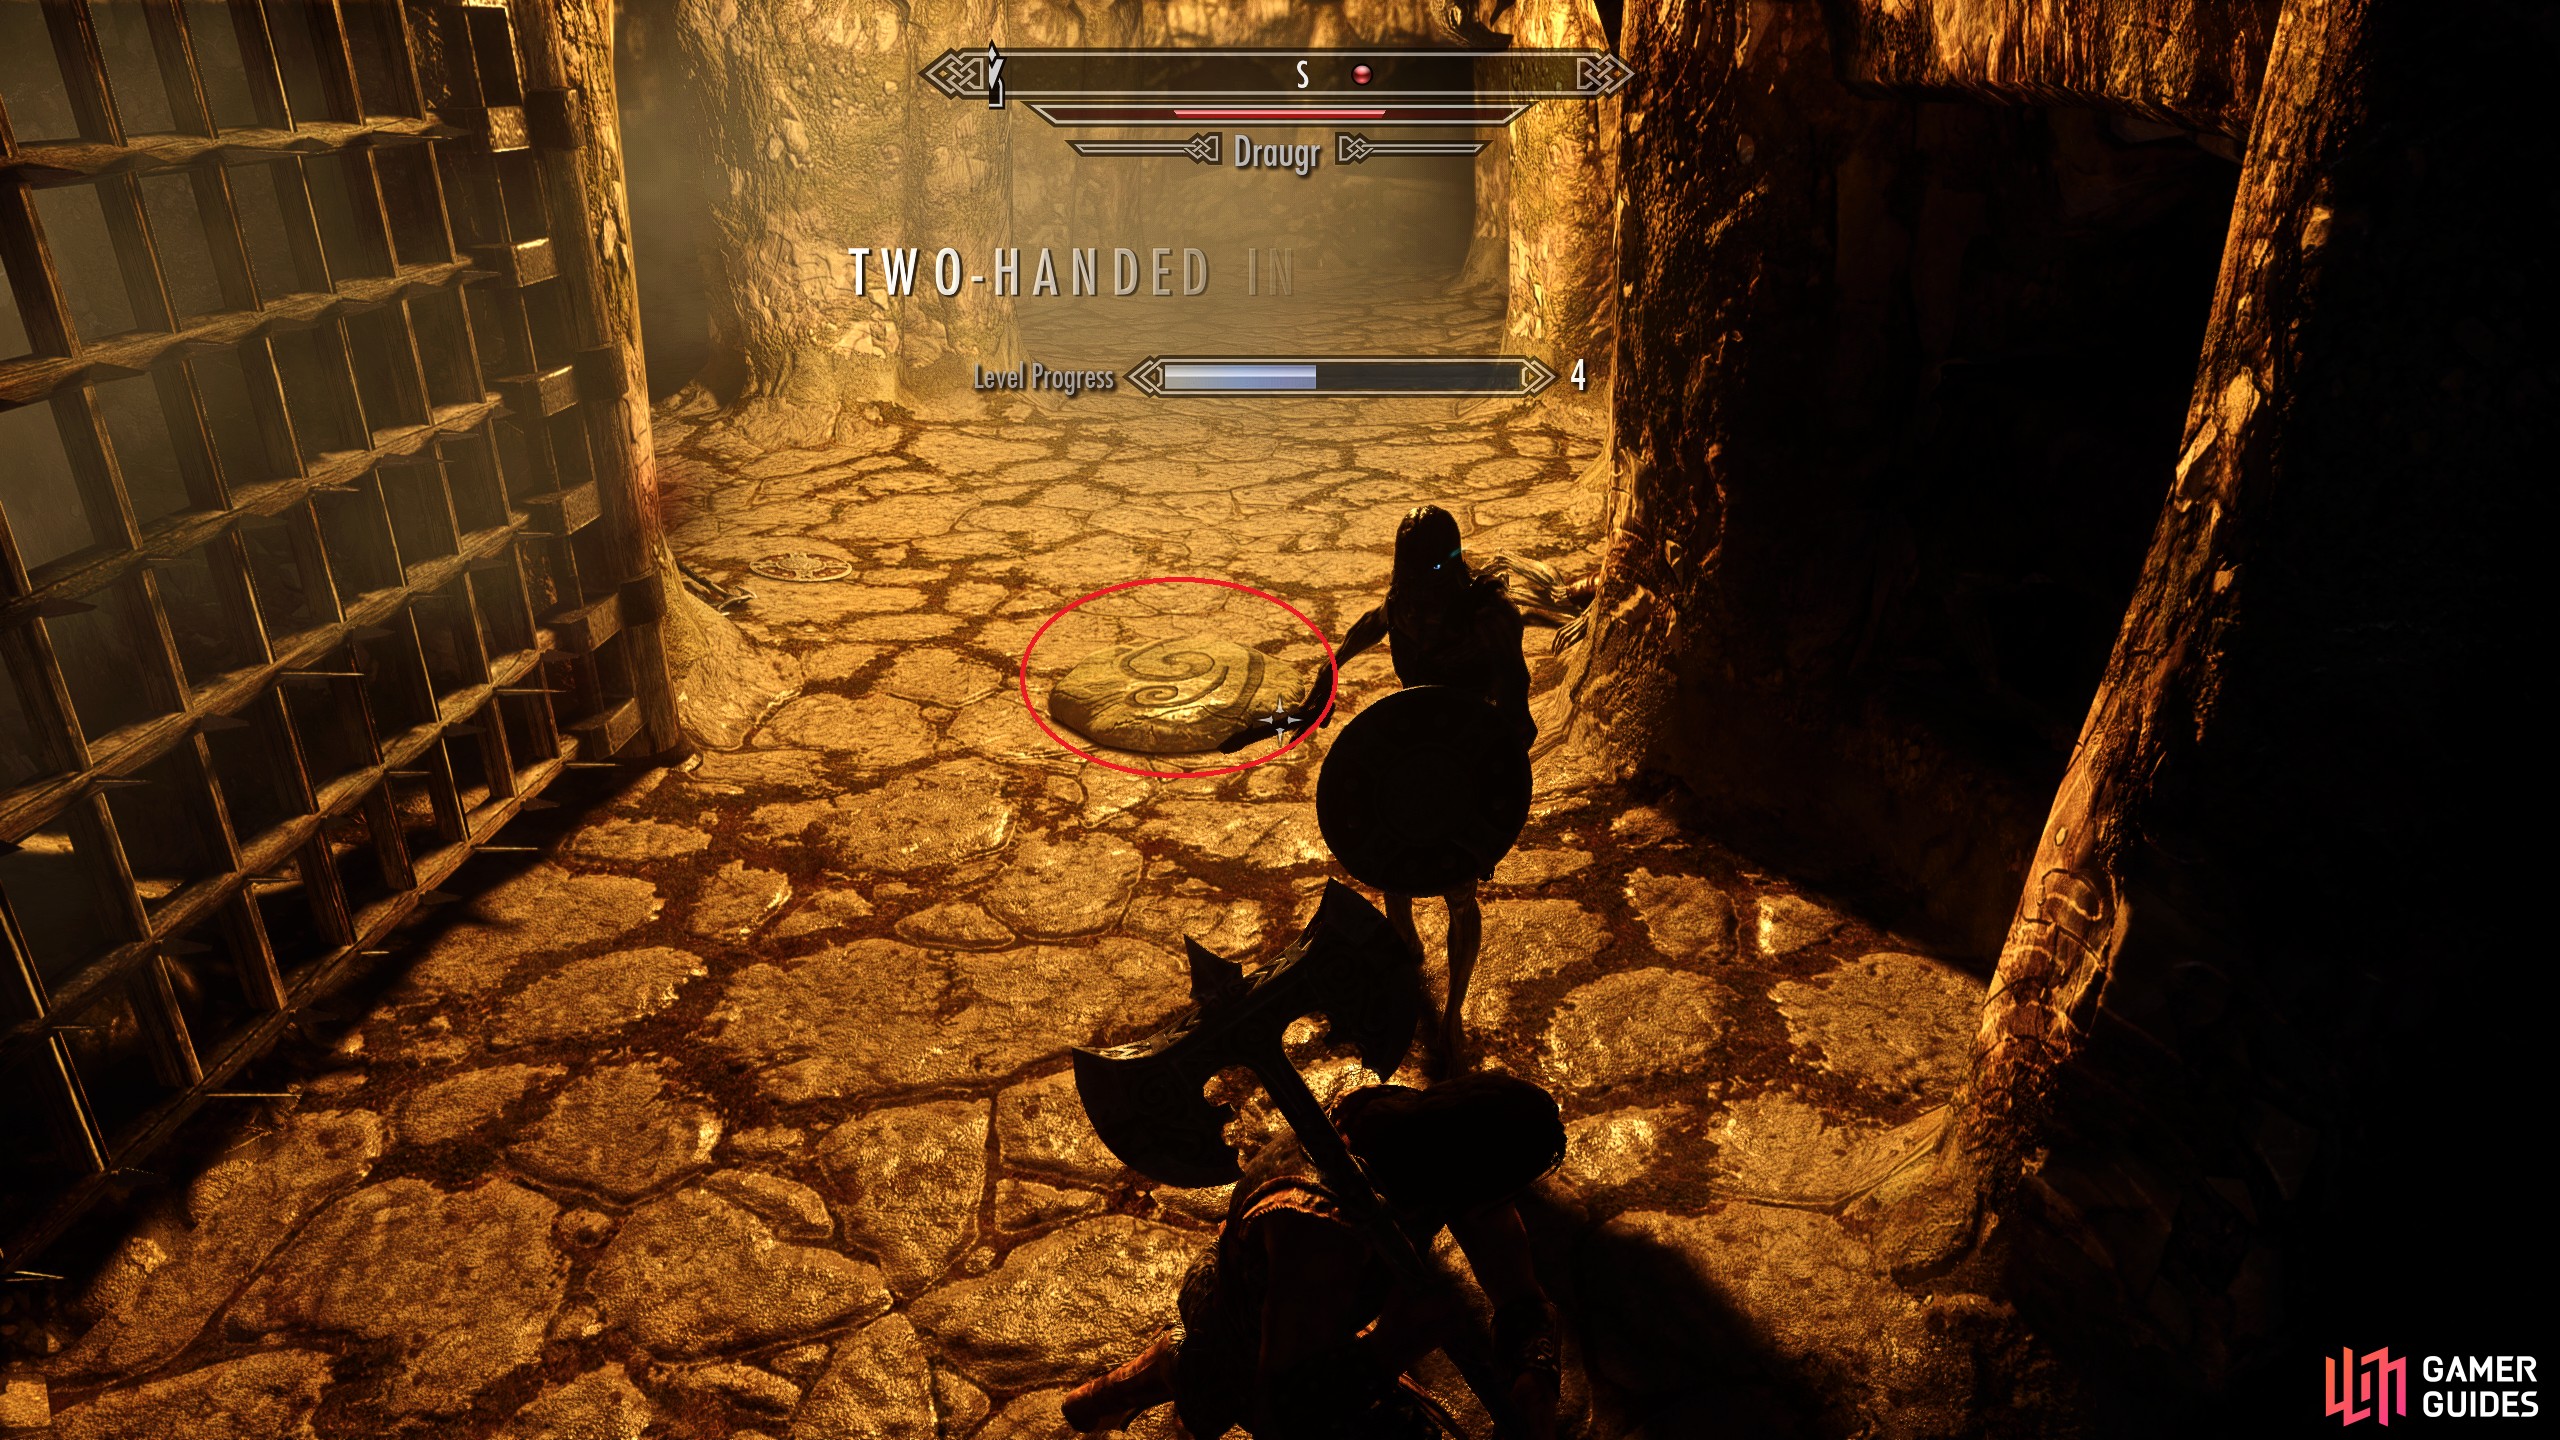 Be sure to avoid the trap device on the floor as you fight the Draugr.